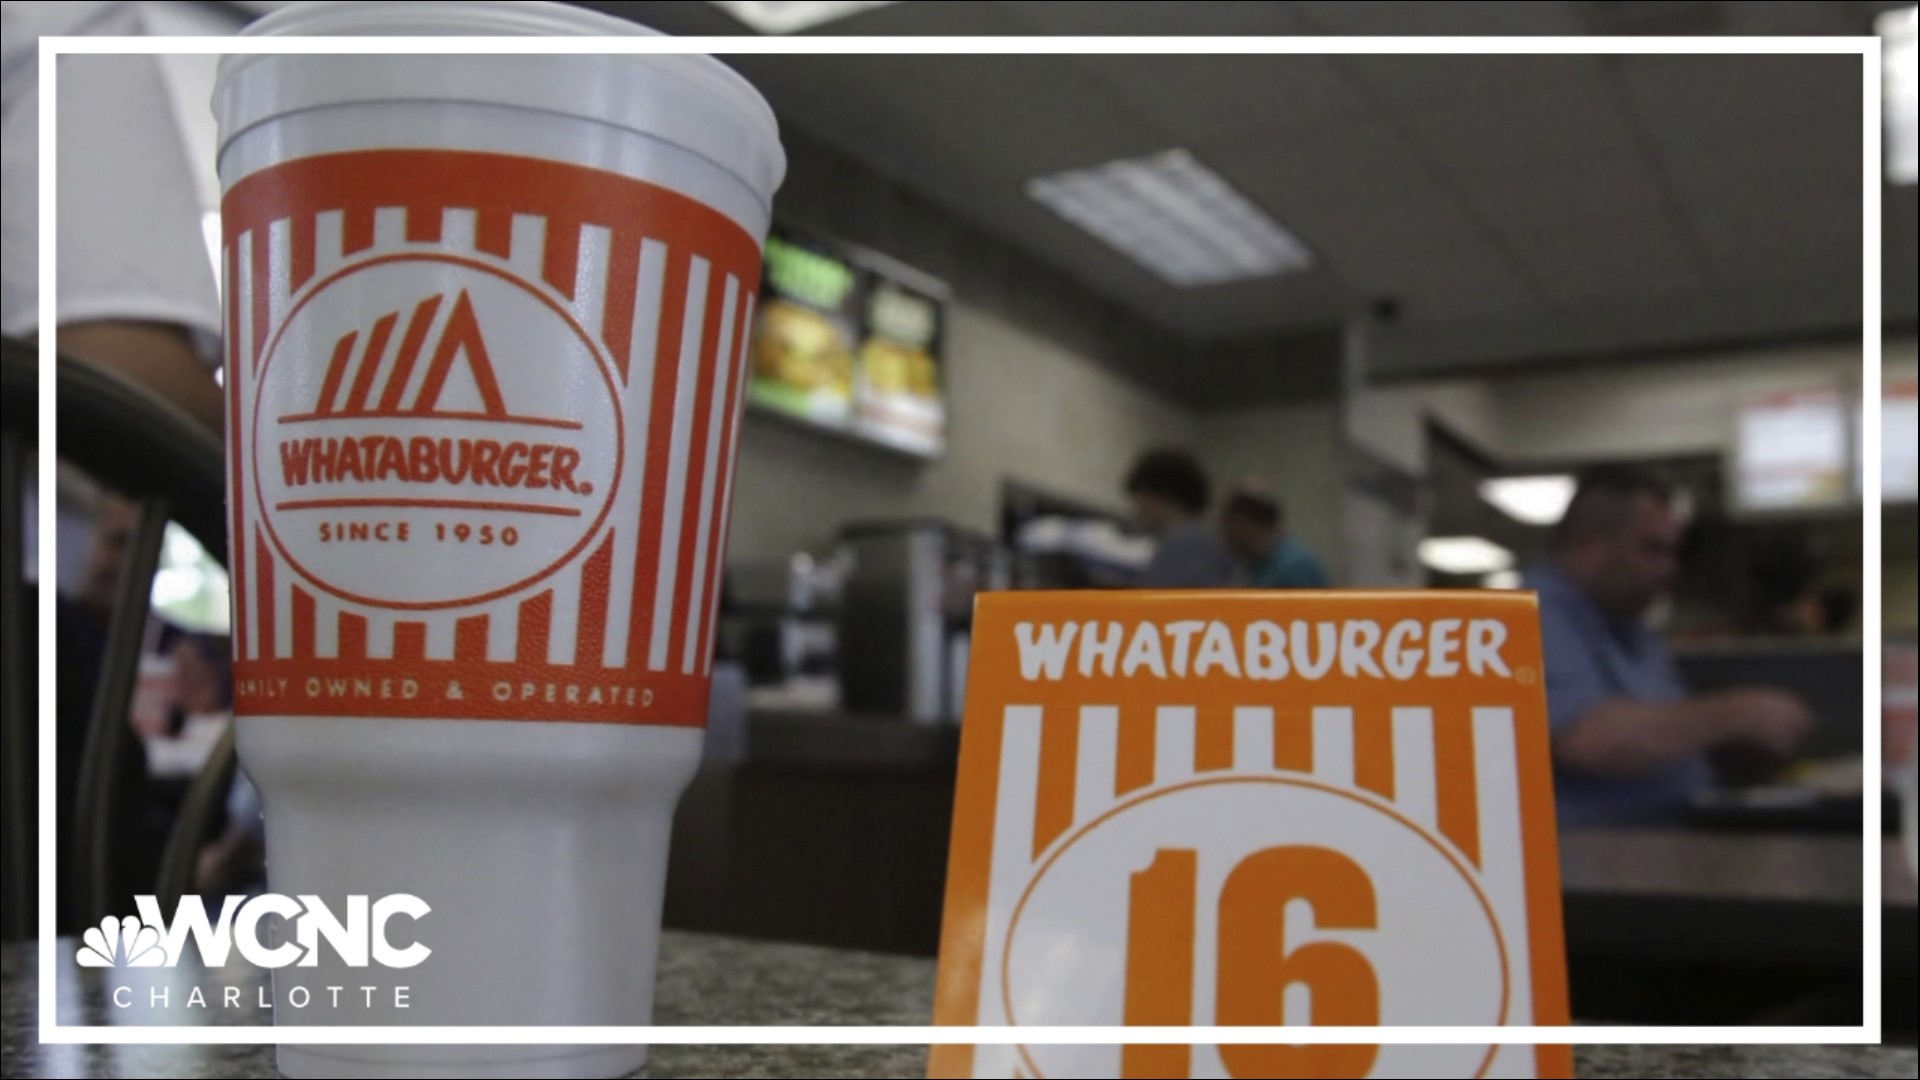 Whataburger, the wildly popular fast food chain known for its Texas origins, could open its first location in Charlotte soon.